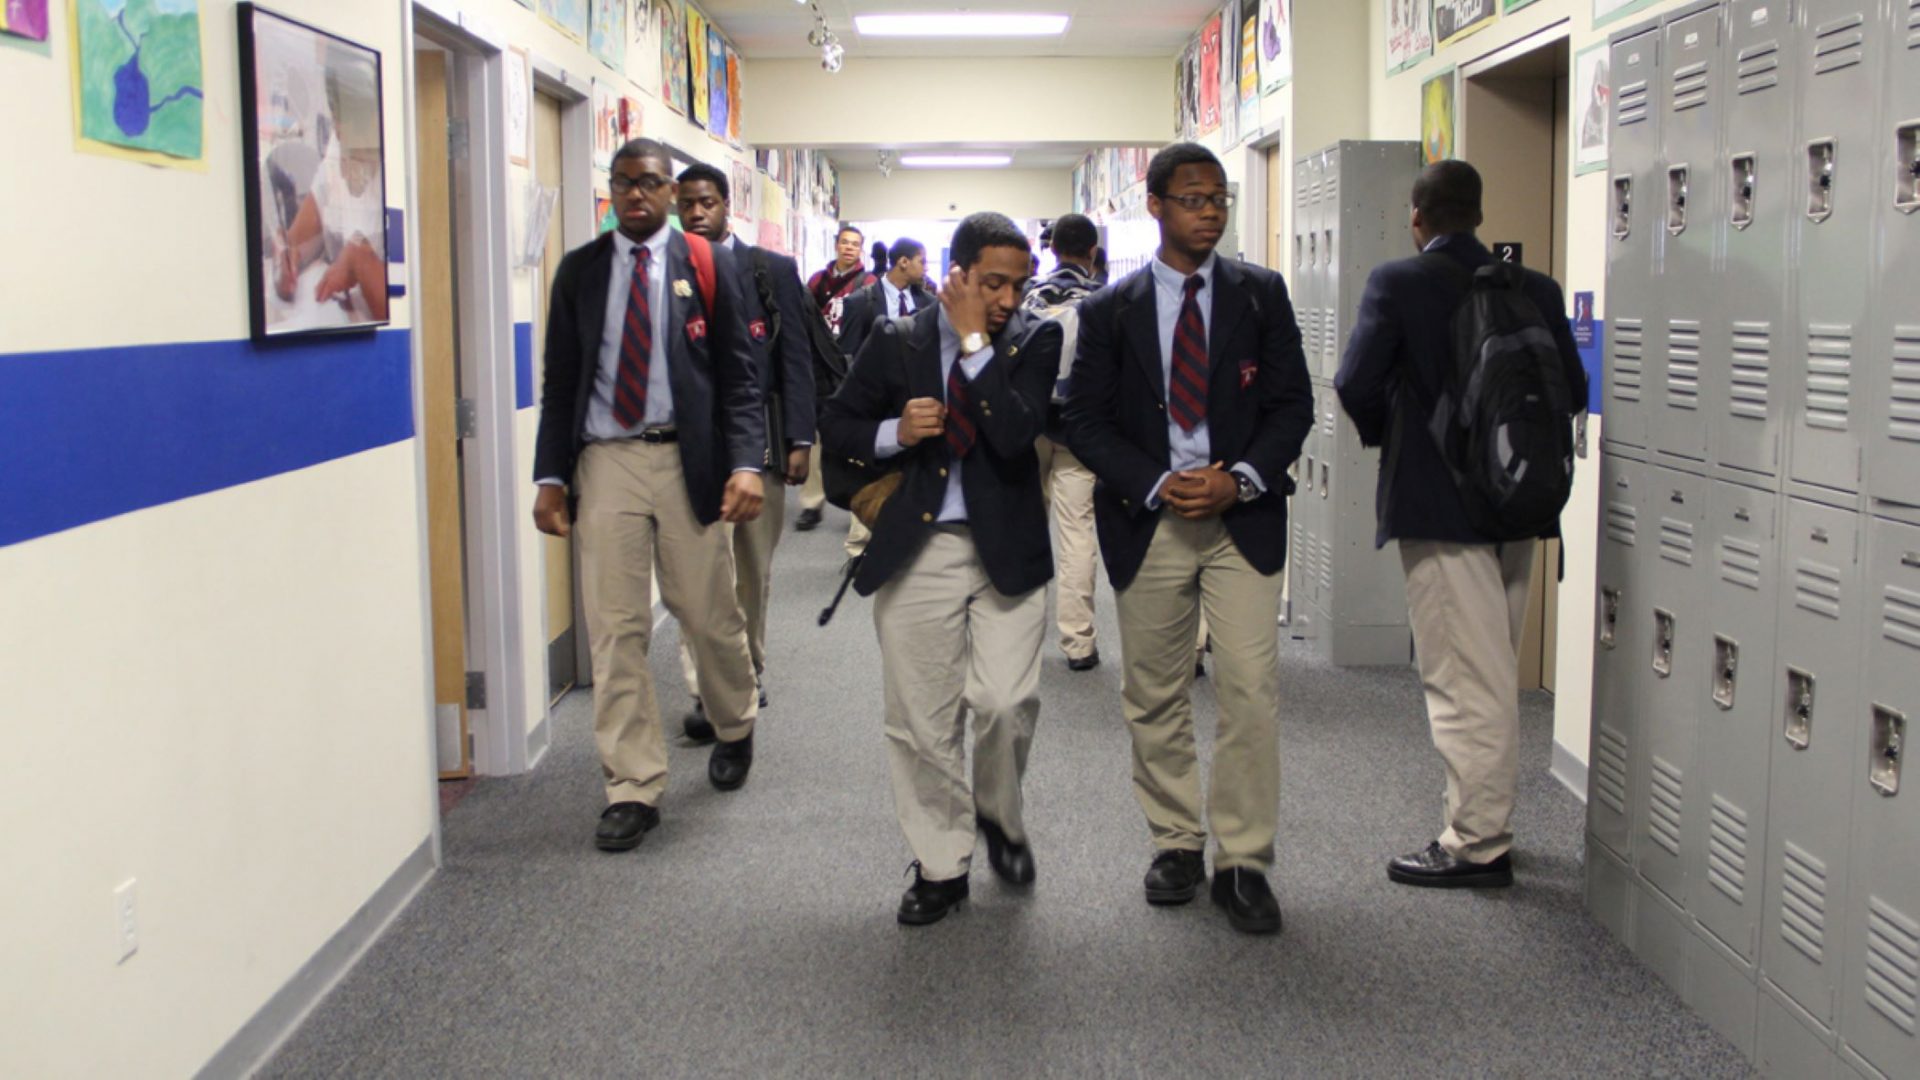 Students at Boys' Latin of Philadelphia Charter School are shown in 2013. Boys' Latin is one of 21 charter schools in the city that joined the coalition